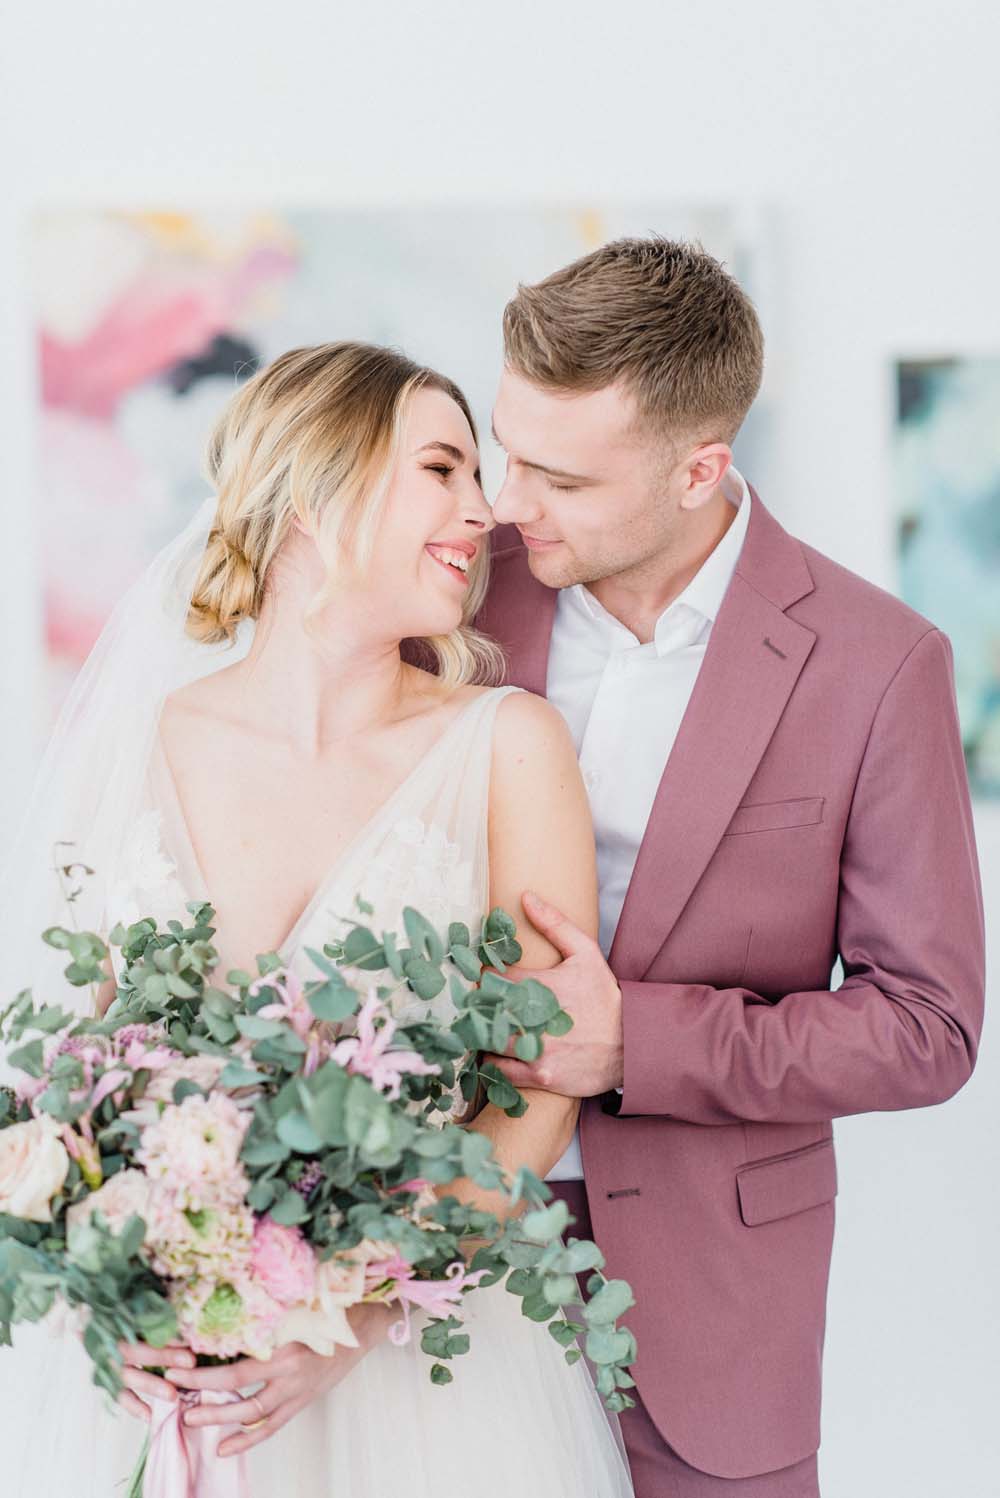 A Colourful Pink & Mauve Styled Shoot At The Art Gallery of Hamilton - couple